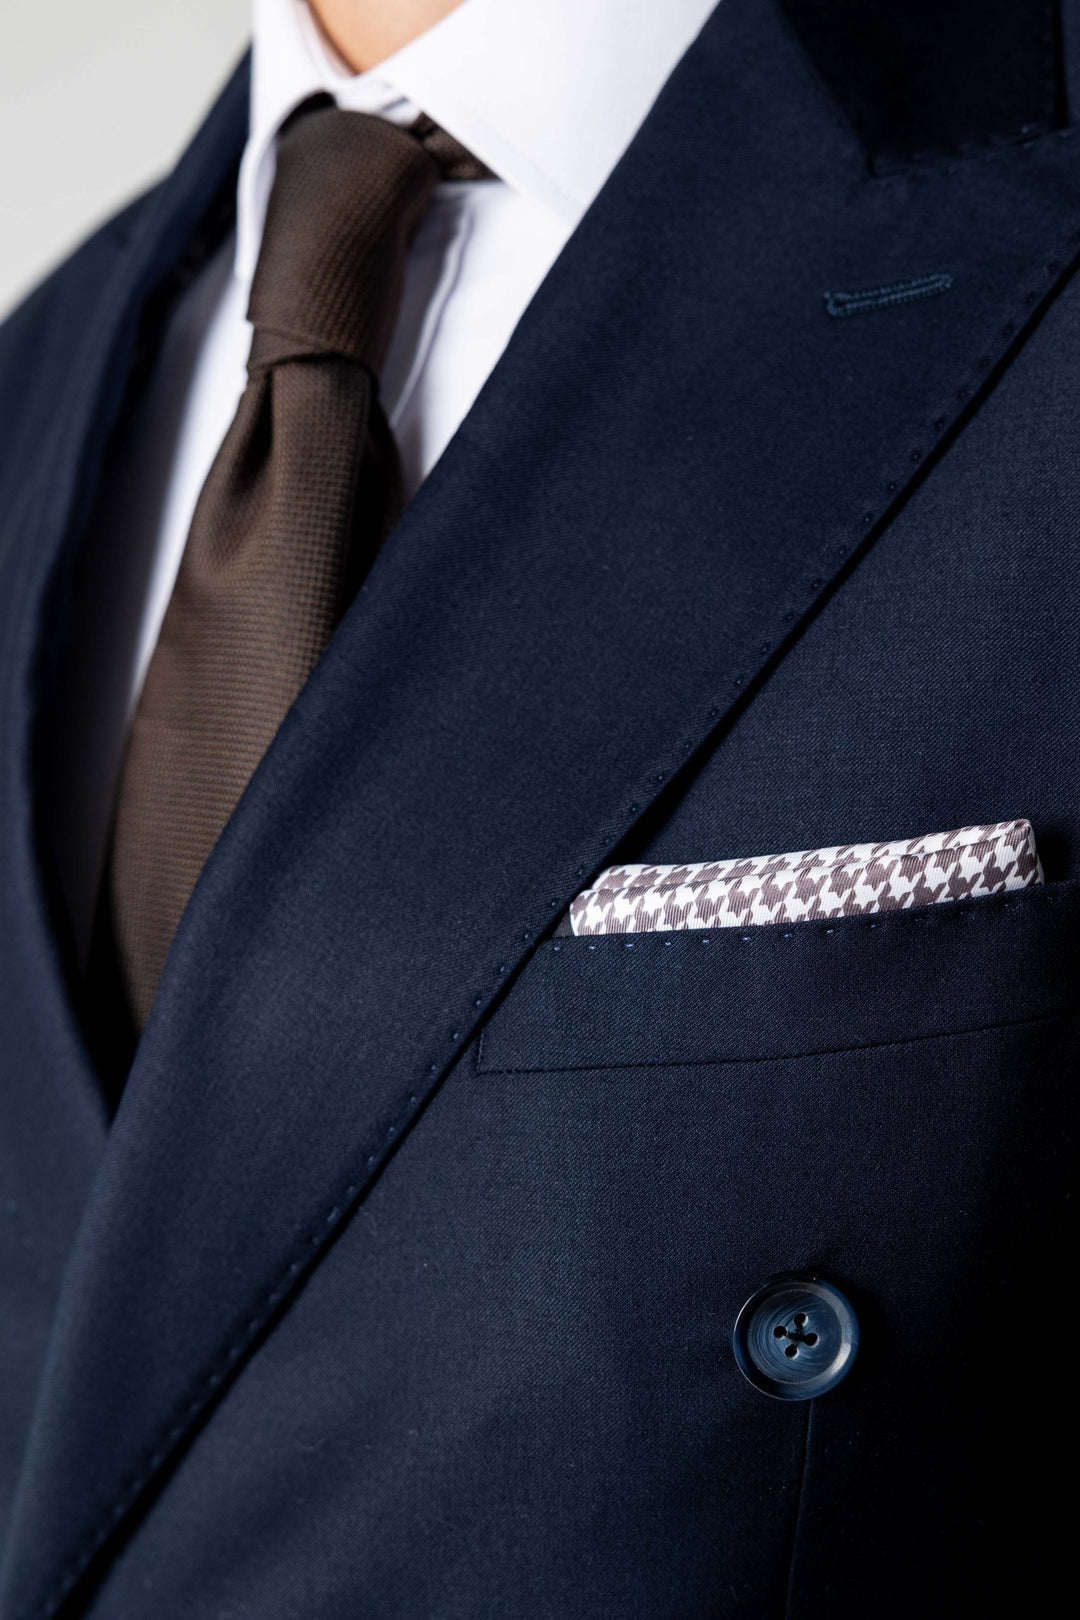 Two-piece navy blue suit with double-breasted jacket